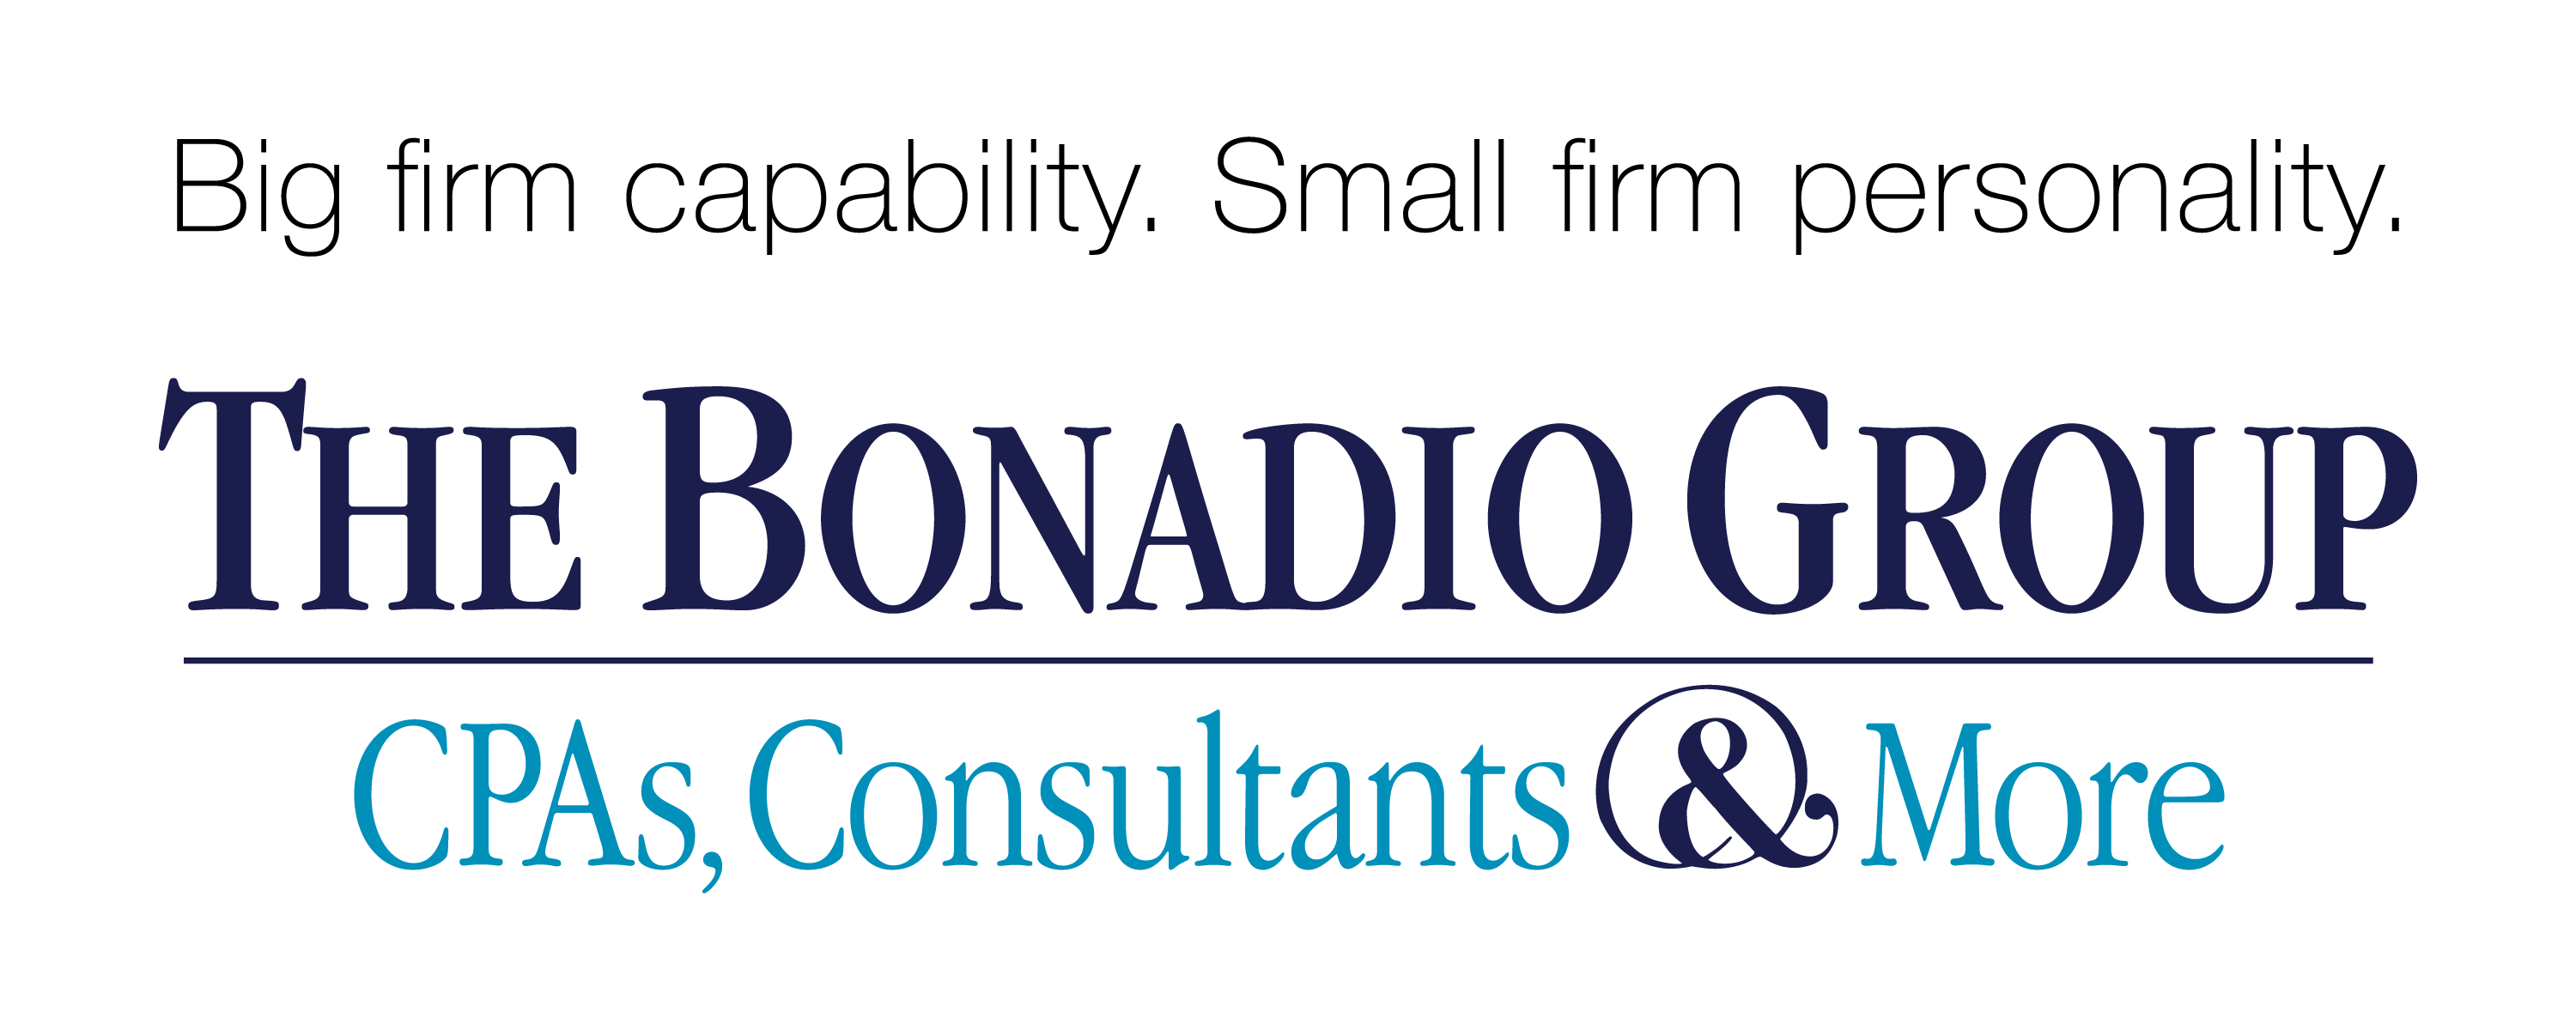 The Bonadio Group logo - Big firm capability. Small firm personality